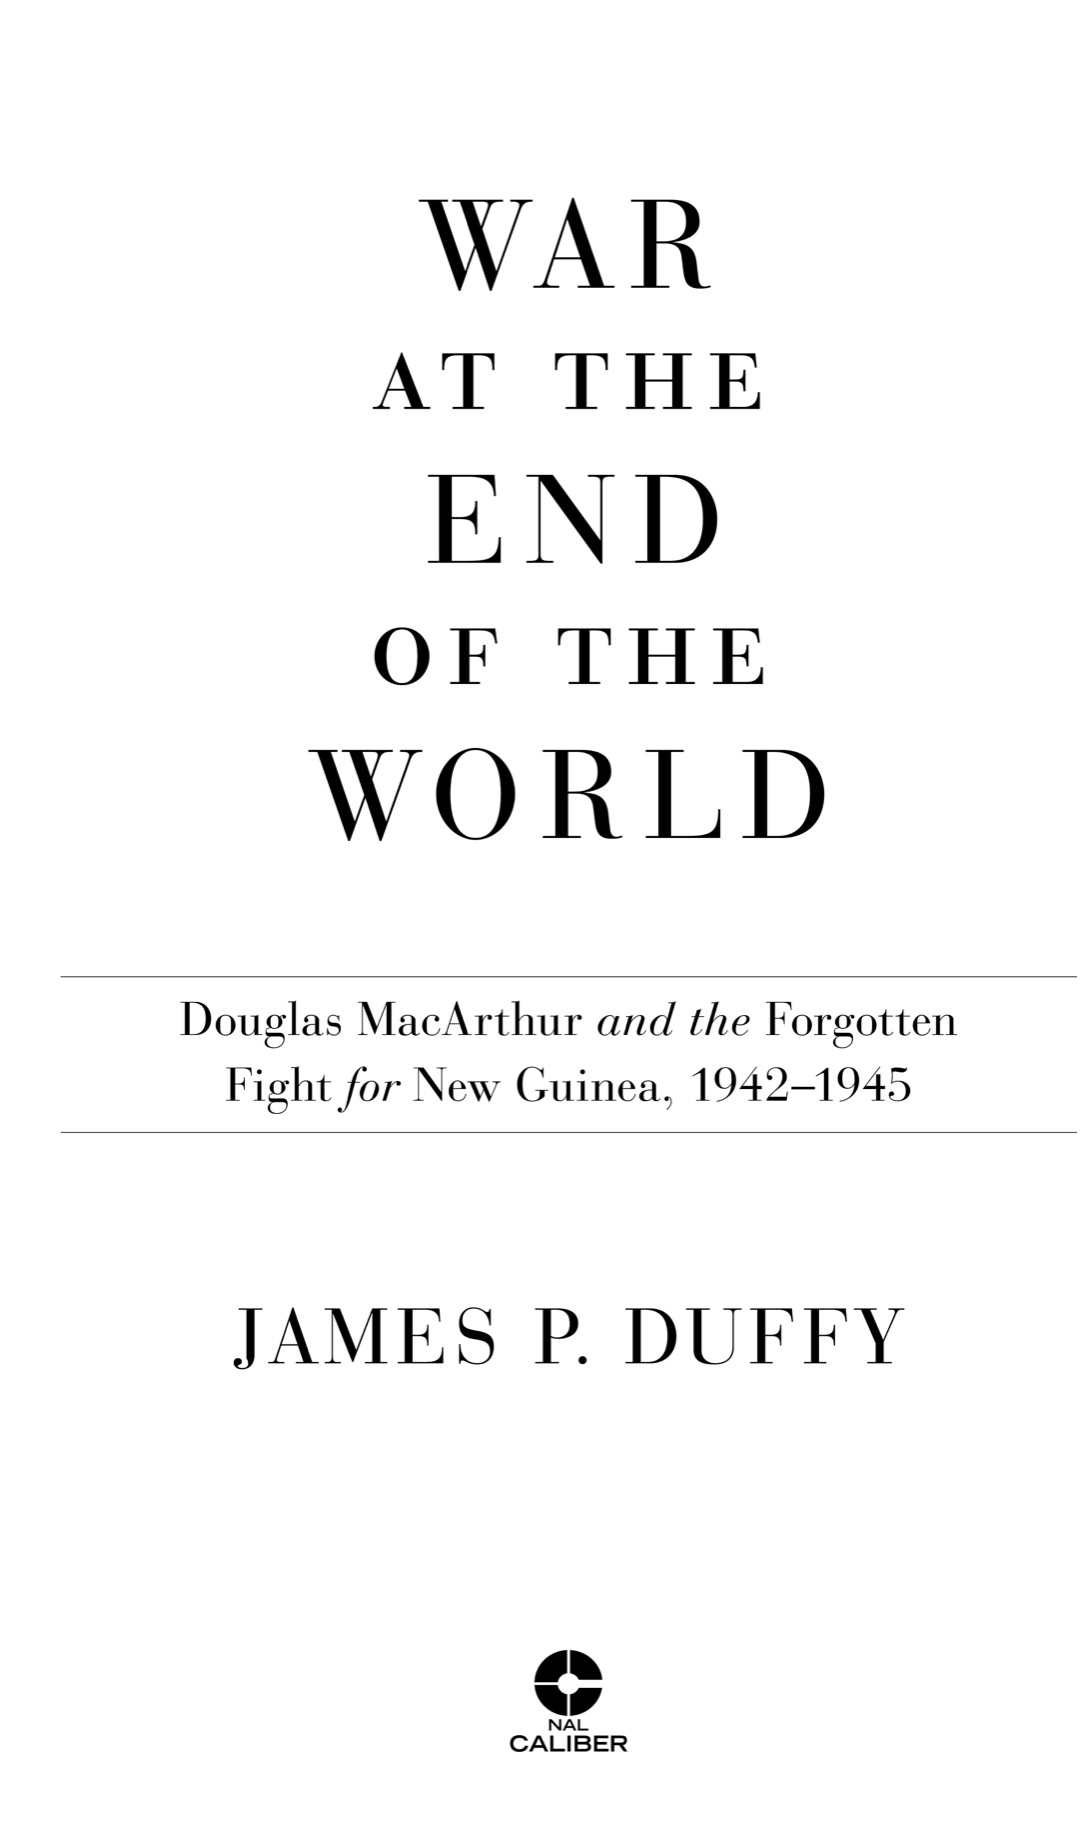 War at the End of the World Douglas MacArthur and the Forgotten Fight For New Guinea 1942-1945 - image 2